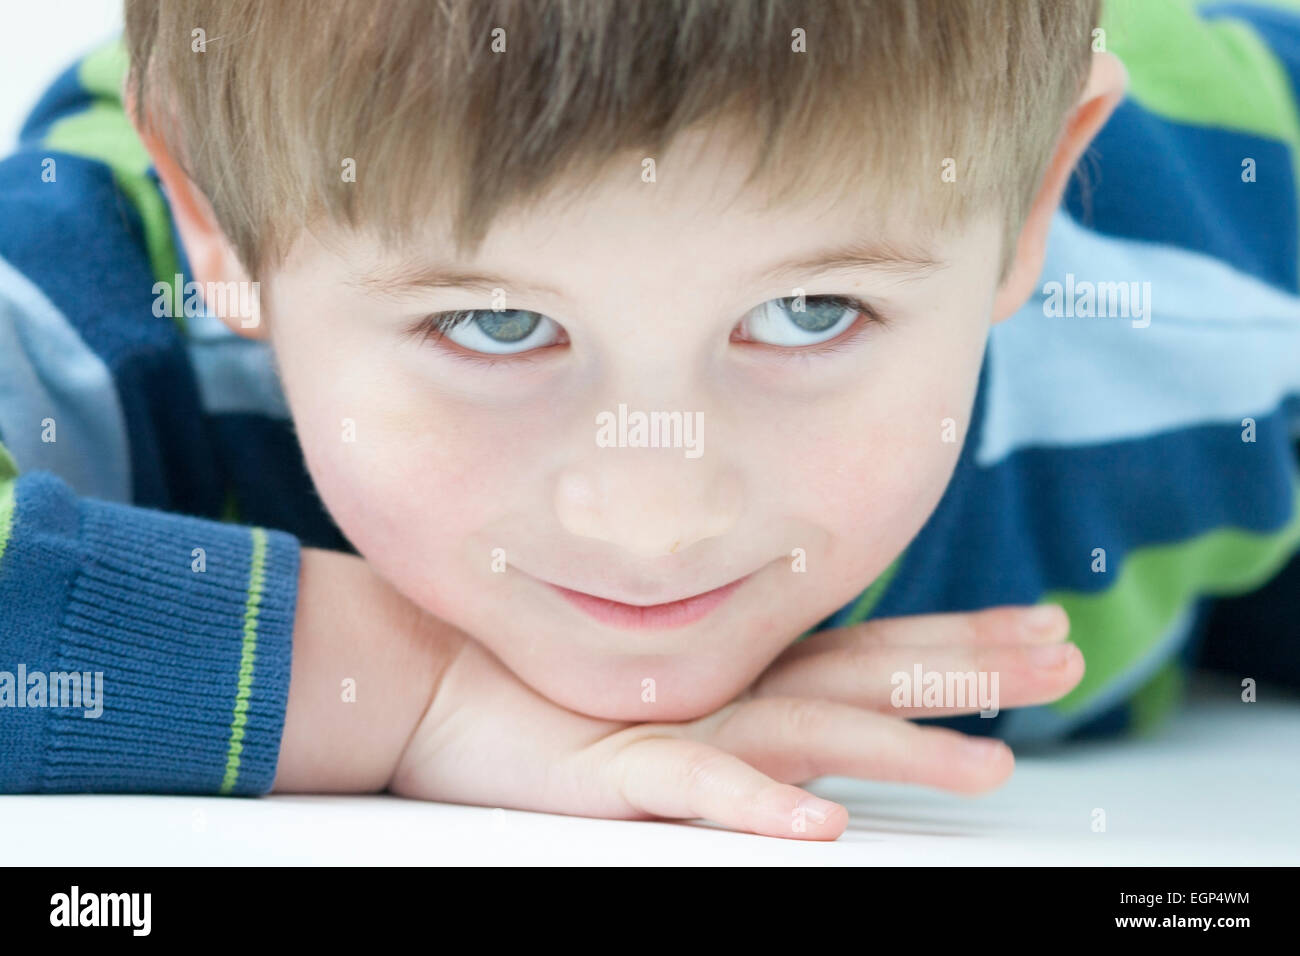 5 year old boy laying down and looking up Stock Photo